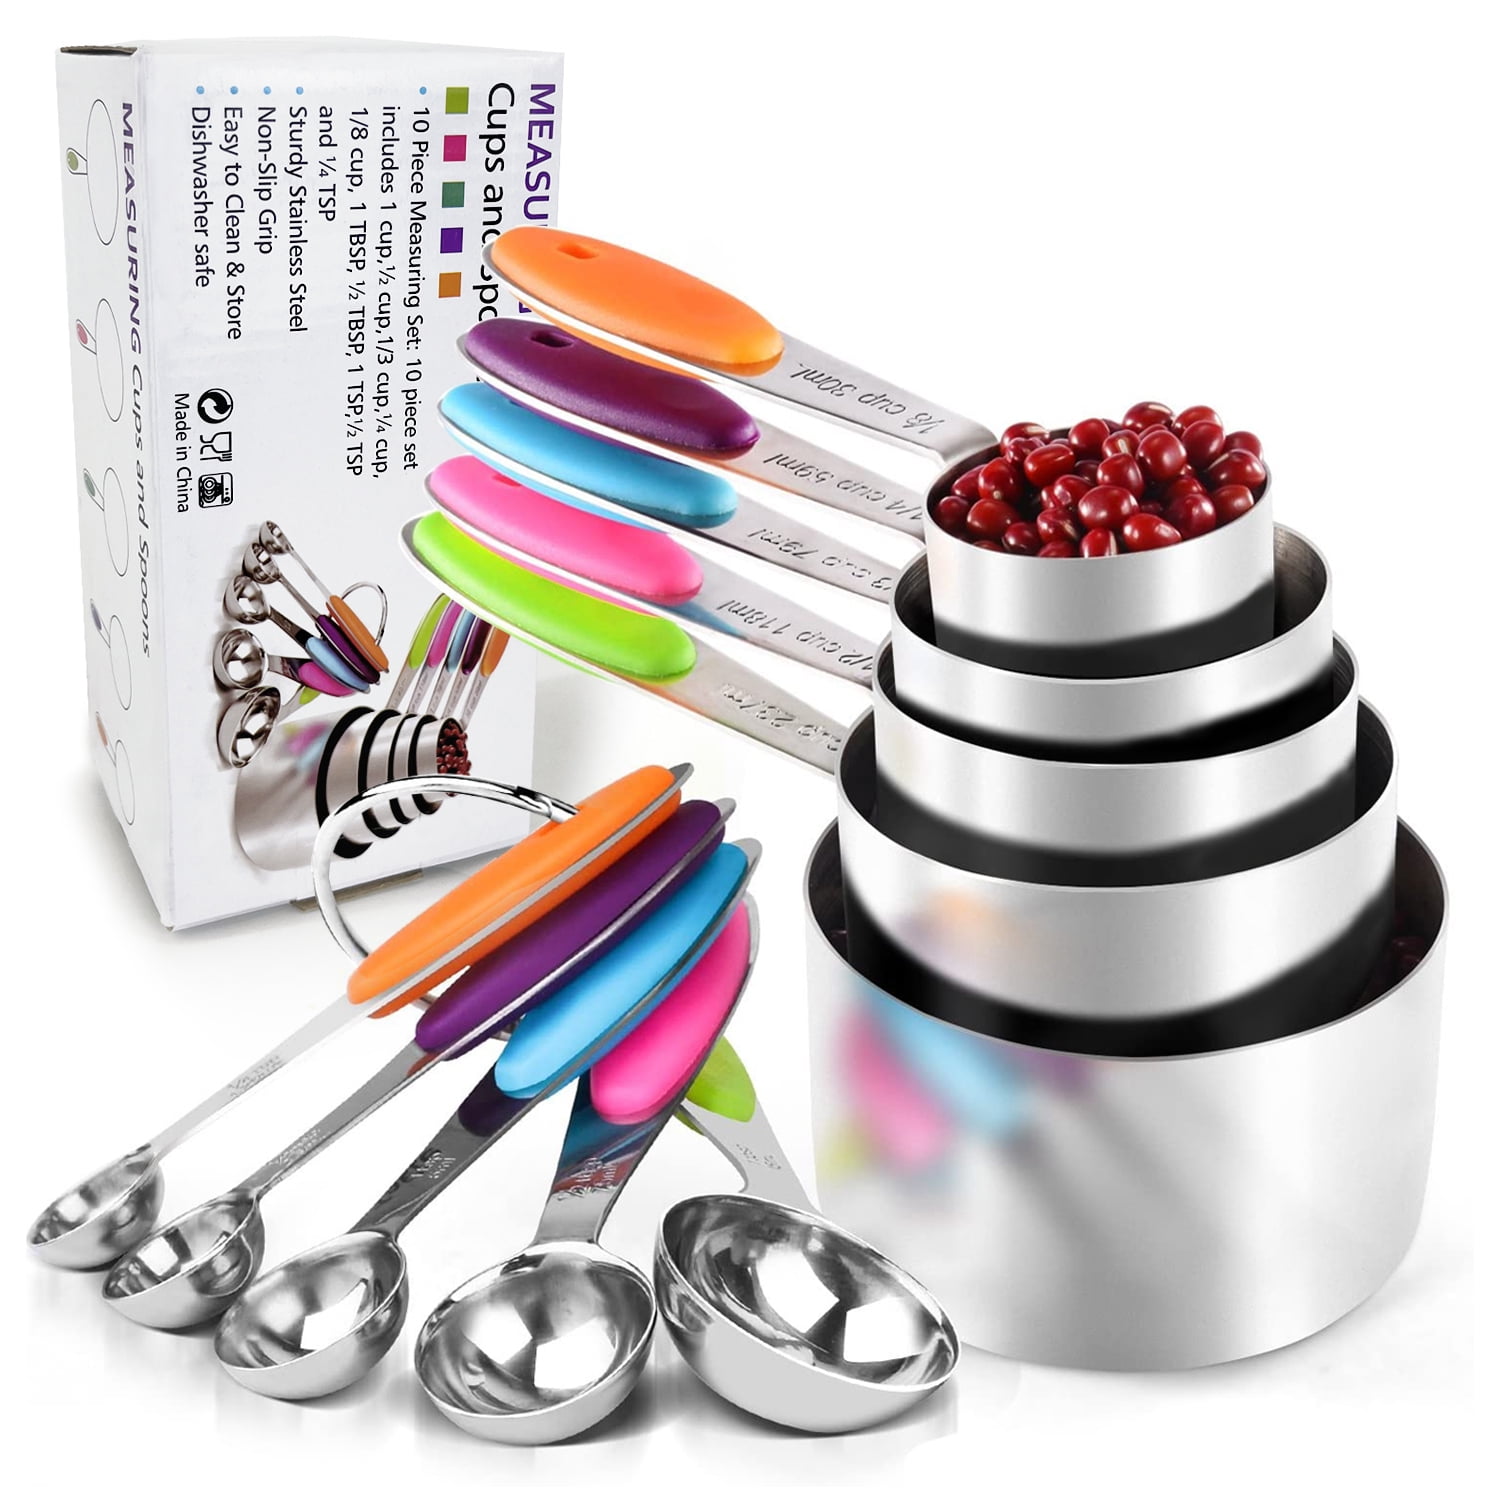 Viwehots Measuring Cups and Spoons Set, 18/8 Stainless Steel Measuring Cups  and Spoons Set with Leveler, Kitchen Metric Measure Cups & Spoons Set for